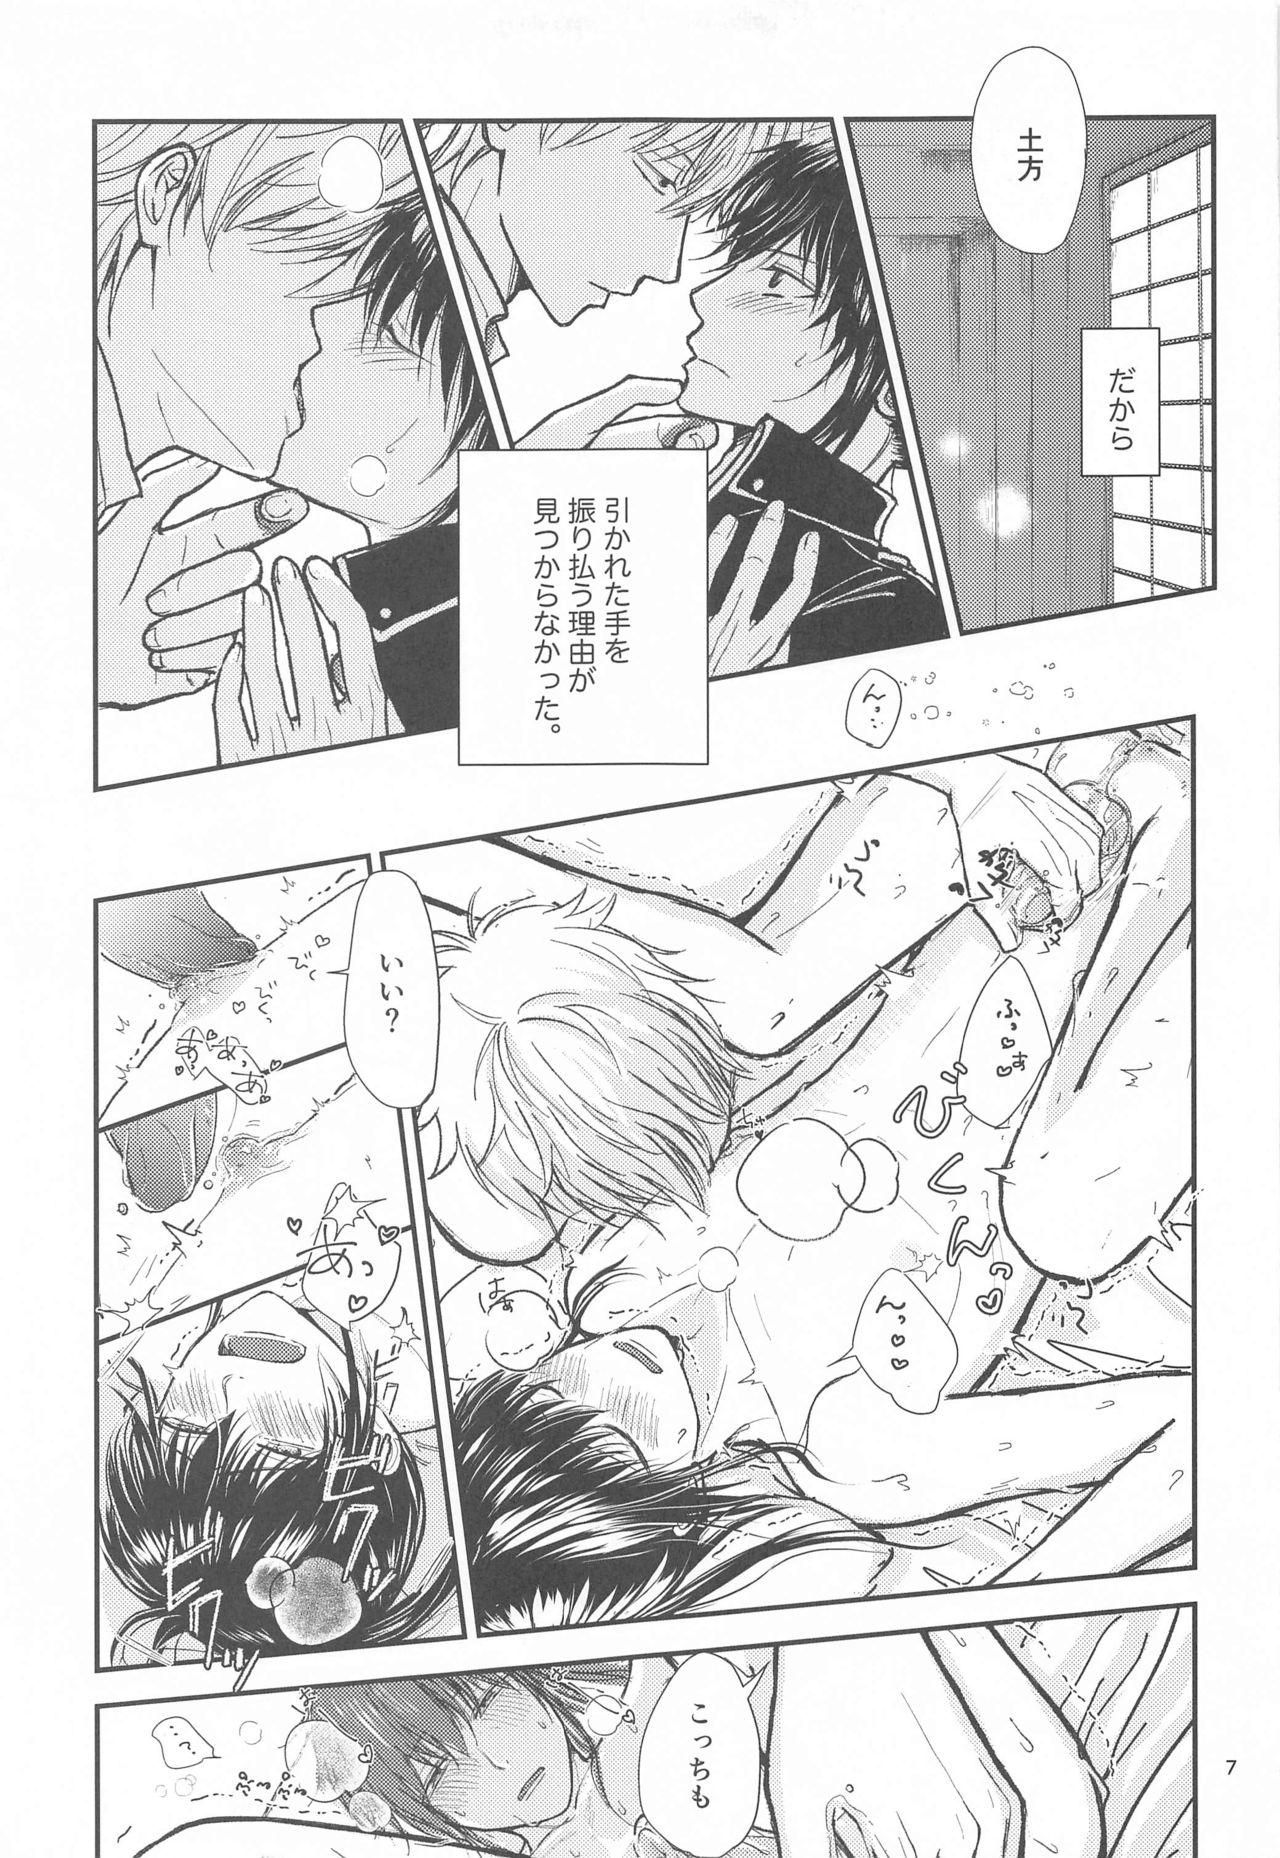 Roughsex unconditional love - Gintama Suck Cock - Page 8